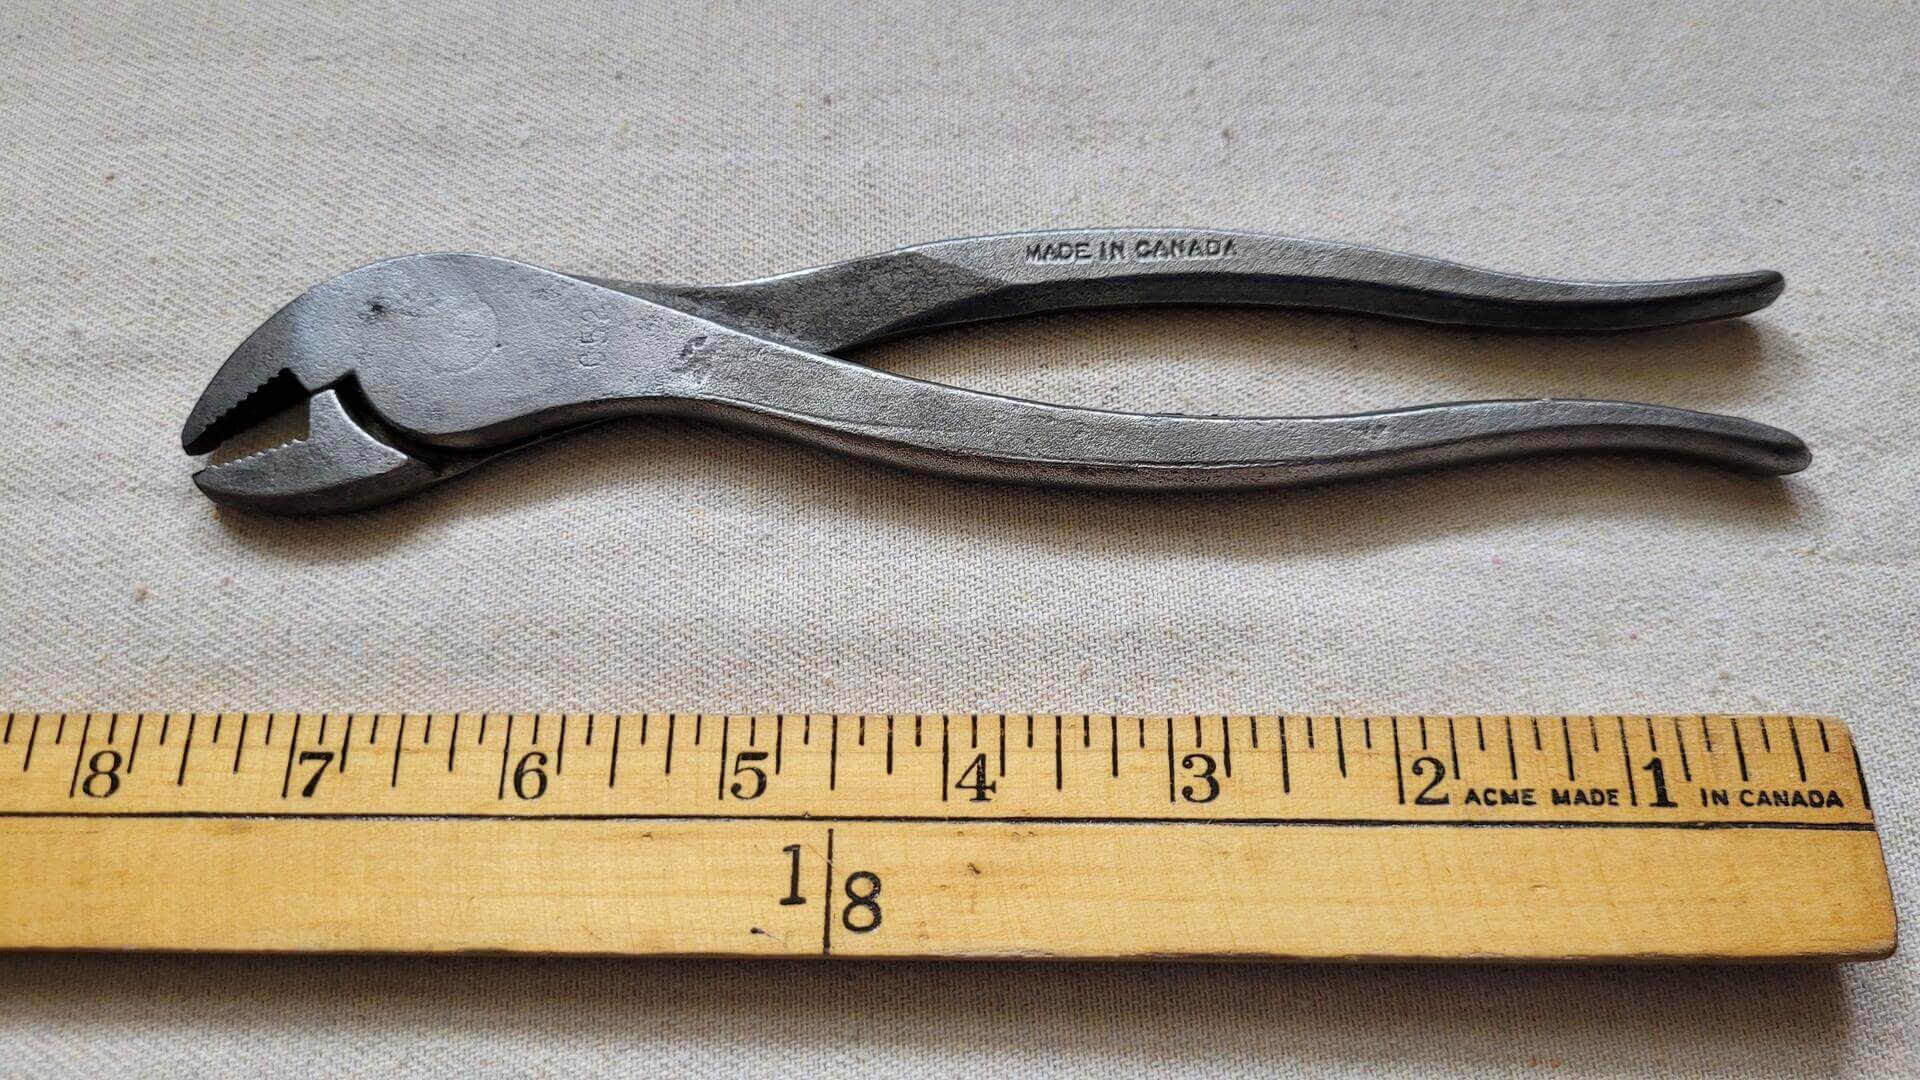 battery-terminal-pliers-made-in-canada-8-inches=antique-vintage-collectible-automotive-mechanic-tools-measurements